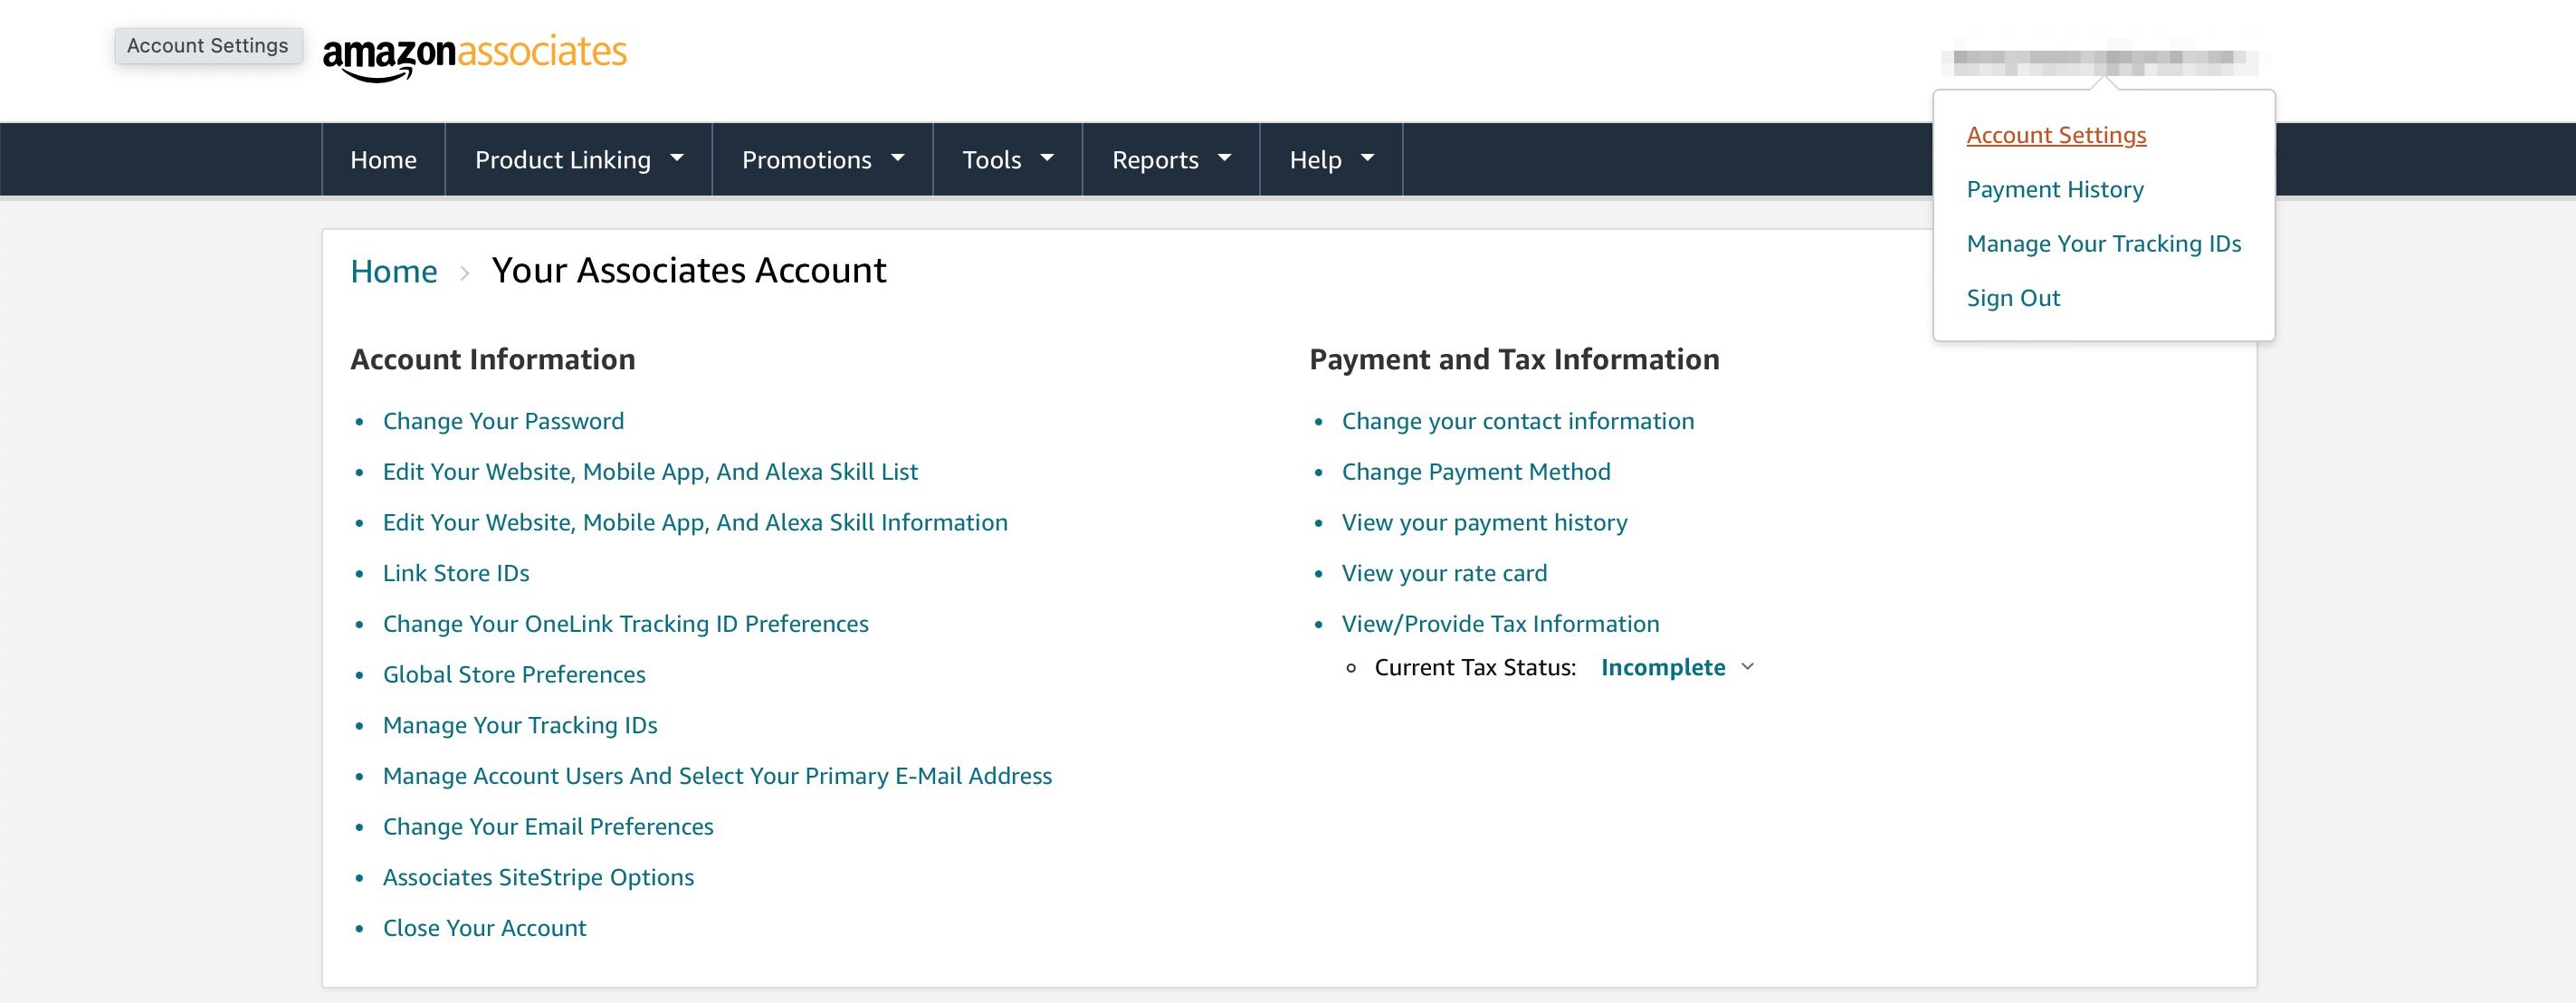 Account Settings Page and Selection in Amazon Associates